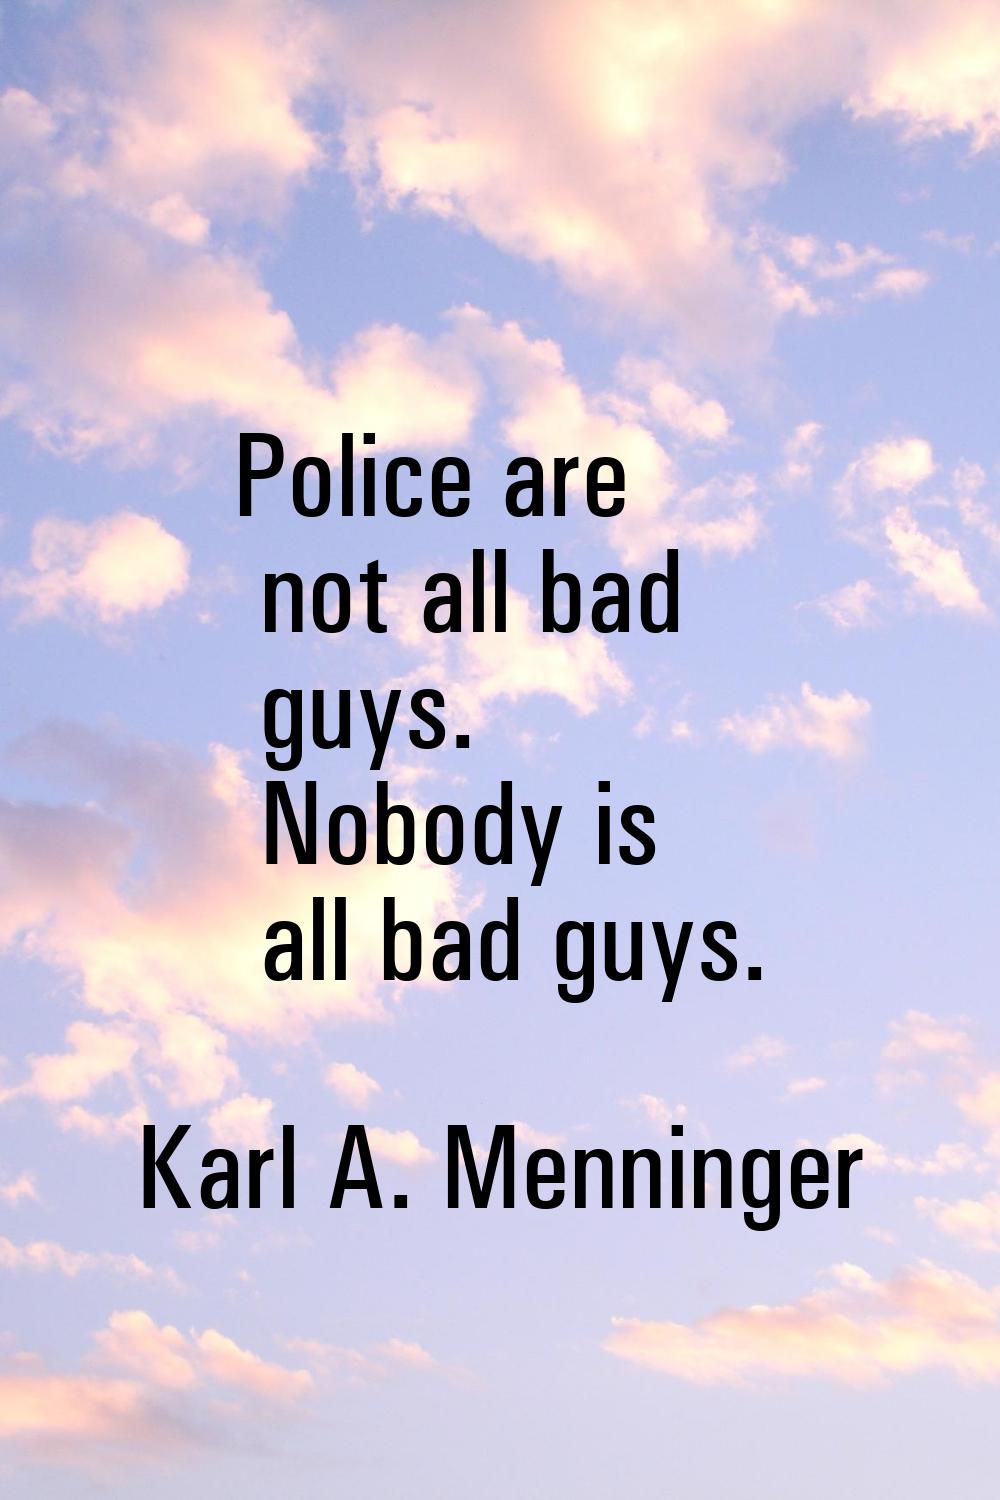 Police are not all bad guys. Nobody is all bad guys.